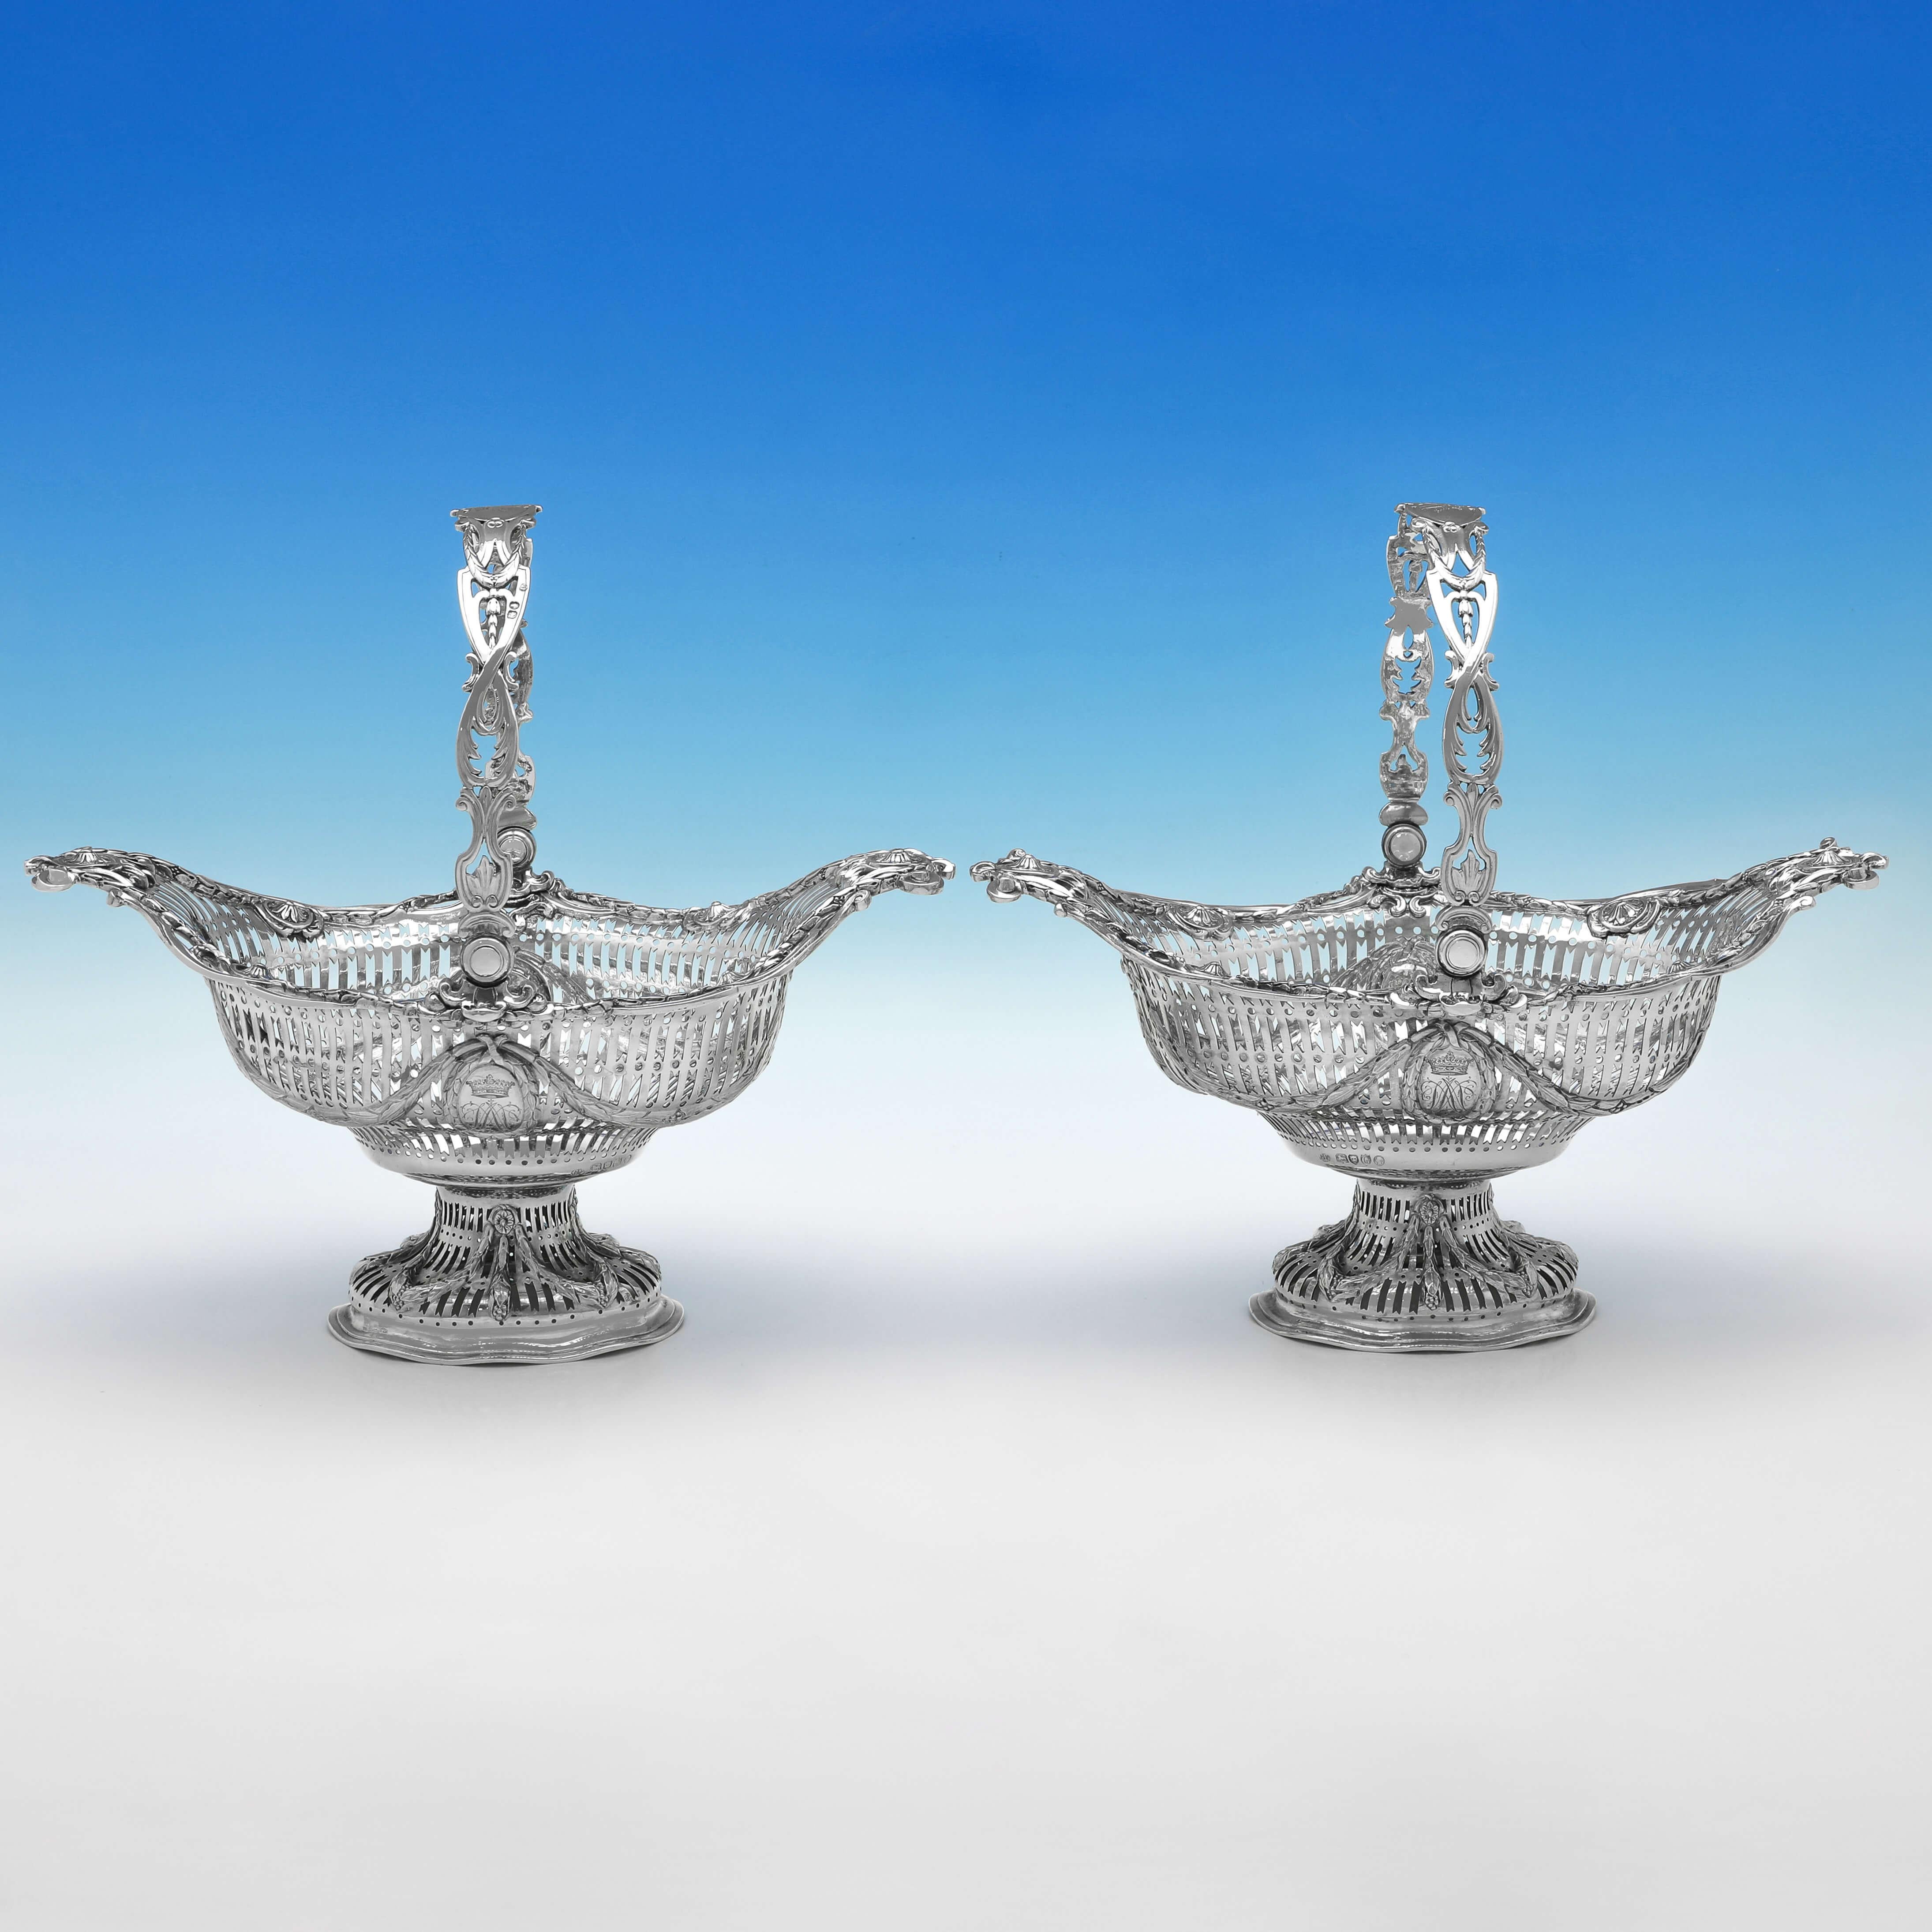 Hallmarked in London in 1882 by George Fox, this striking pair of Victorian, Antique Sterling Silver Baskets, are ornately decorated, with pierced sides and feet, cast and applied rosettes and swags, pierced swing handles, and engraved crests and